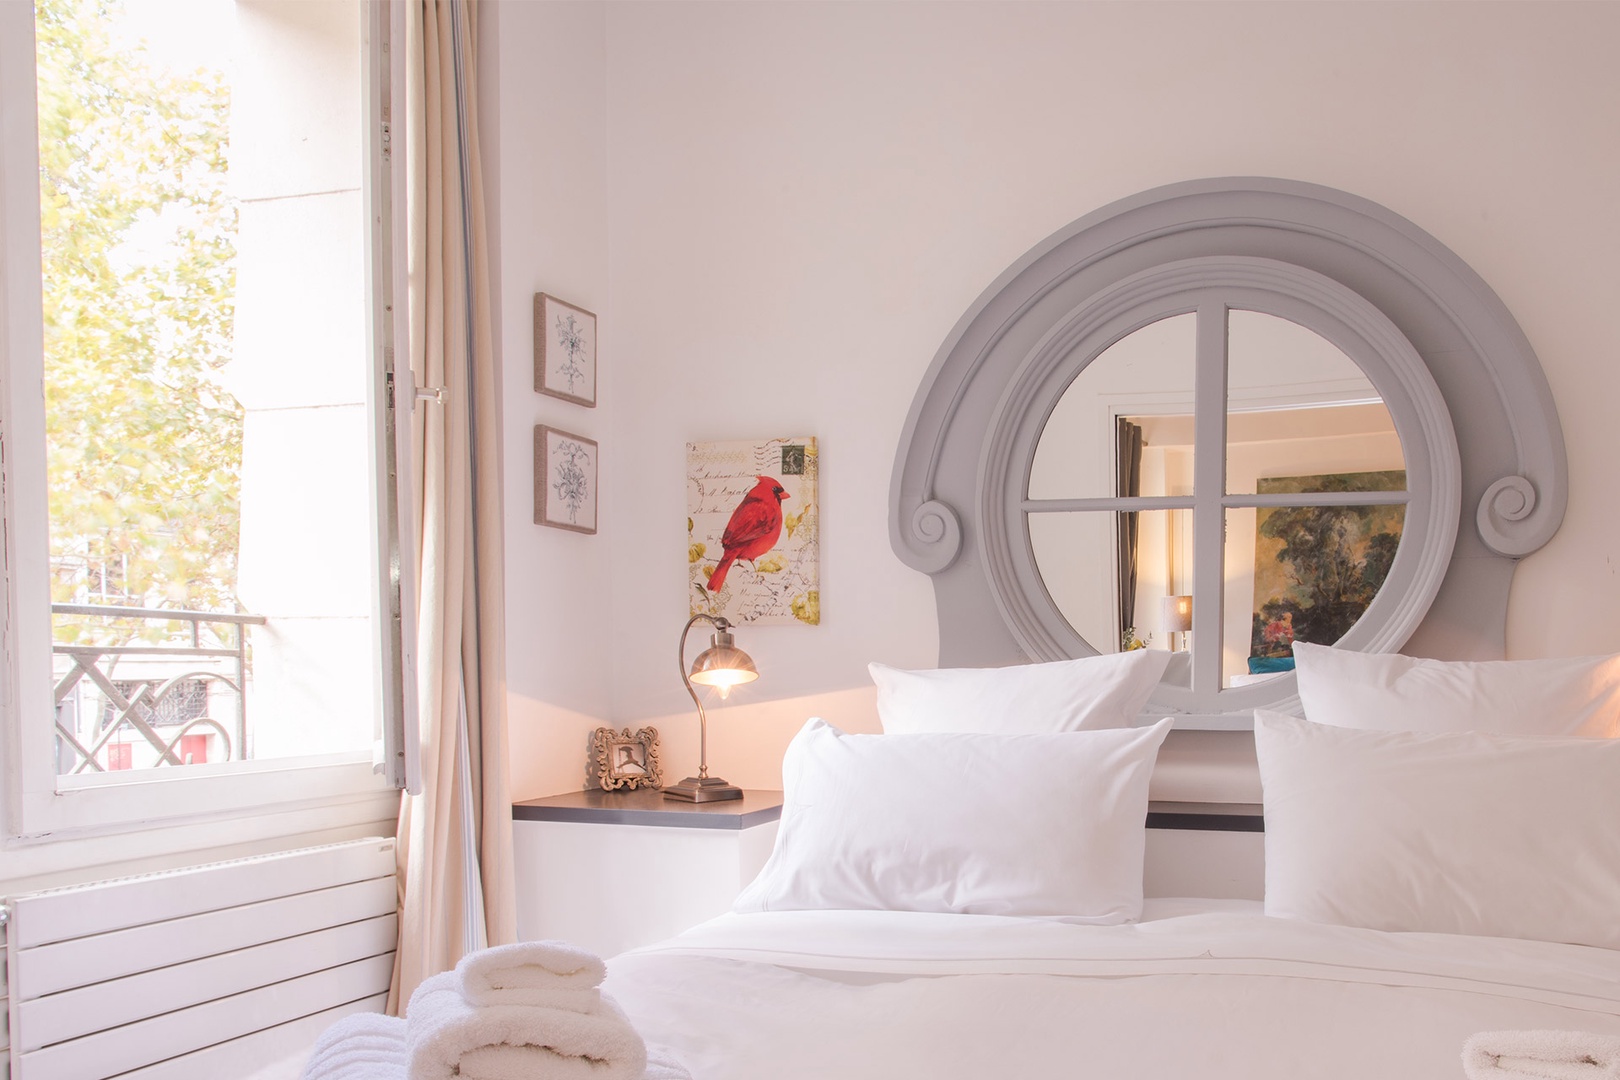 Large windows let lots of light into the lovely Parisian bedroom.